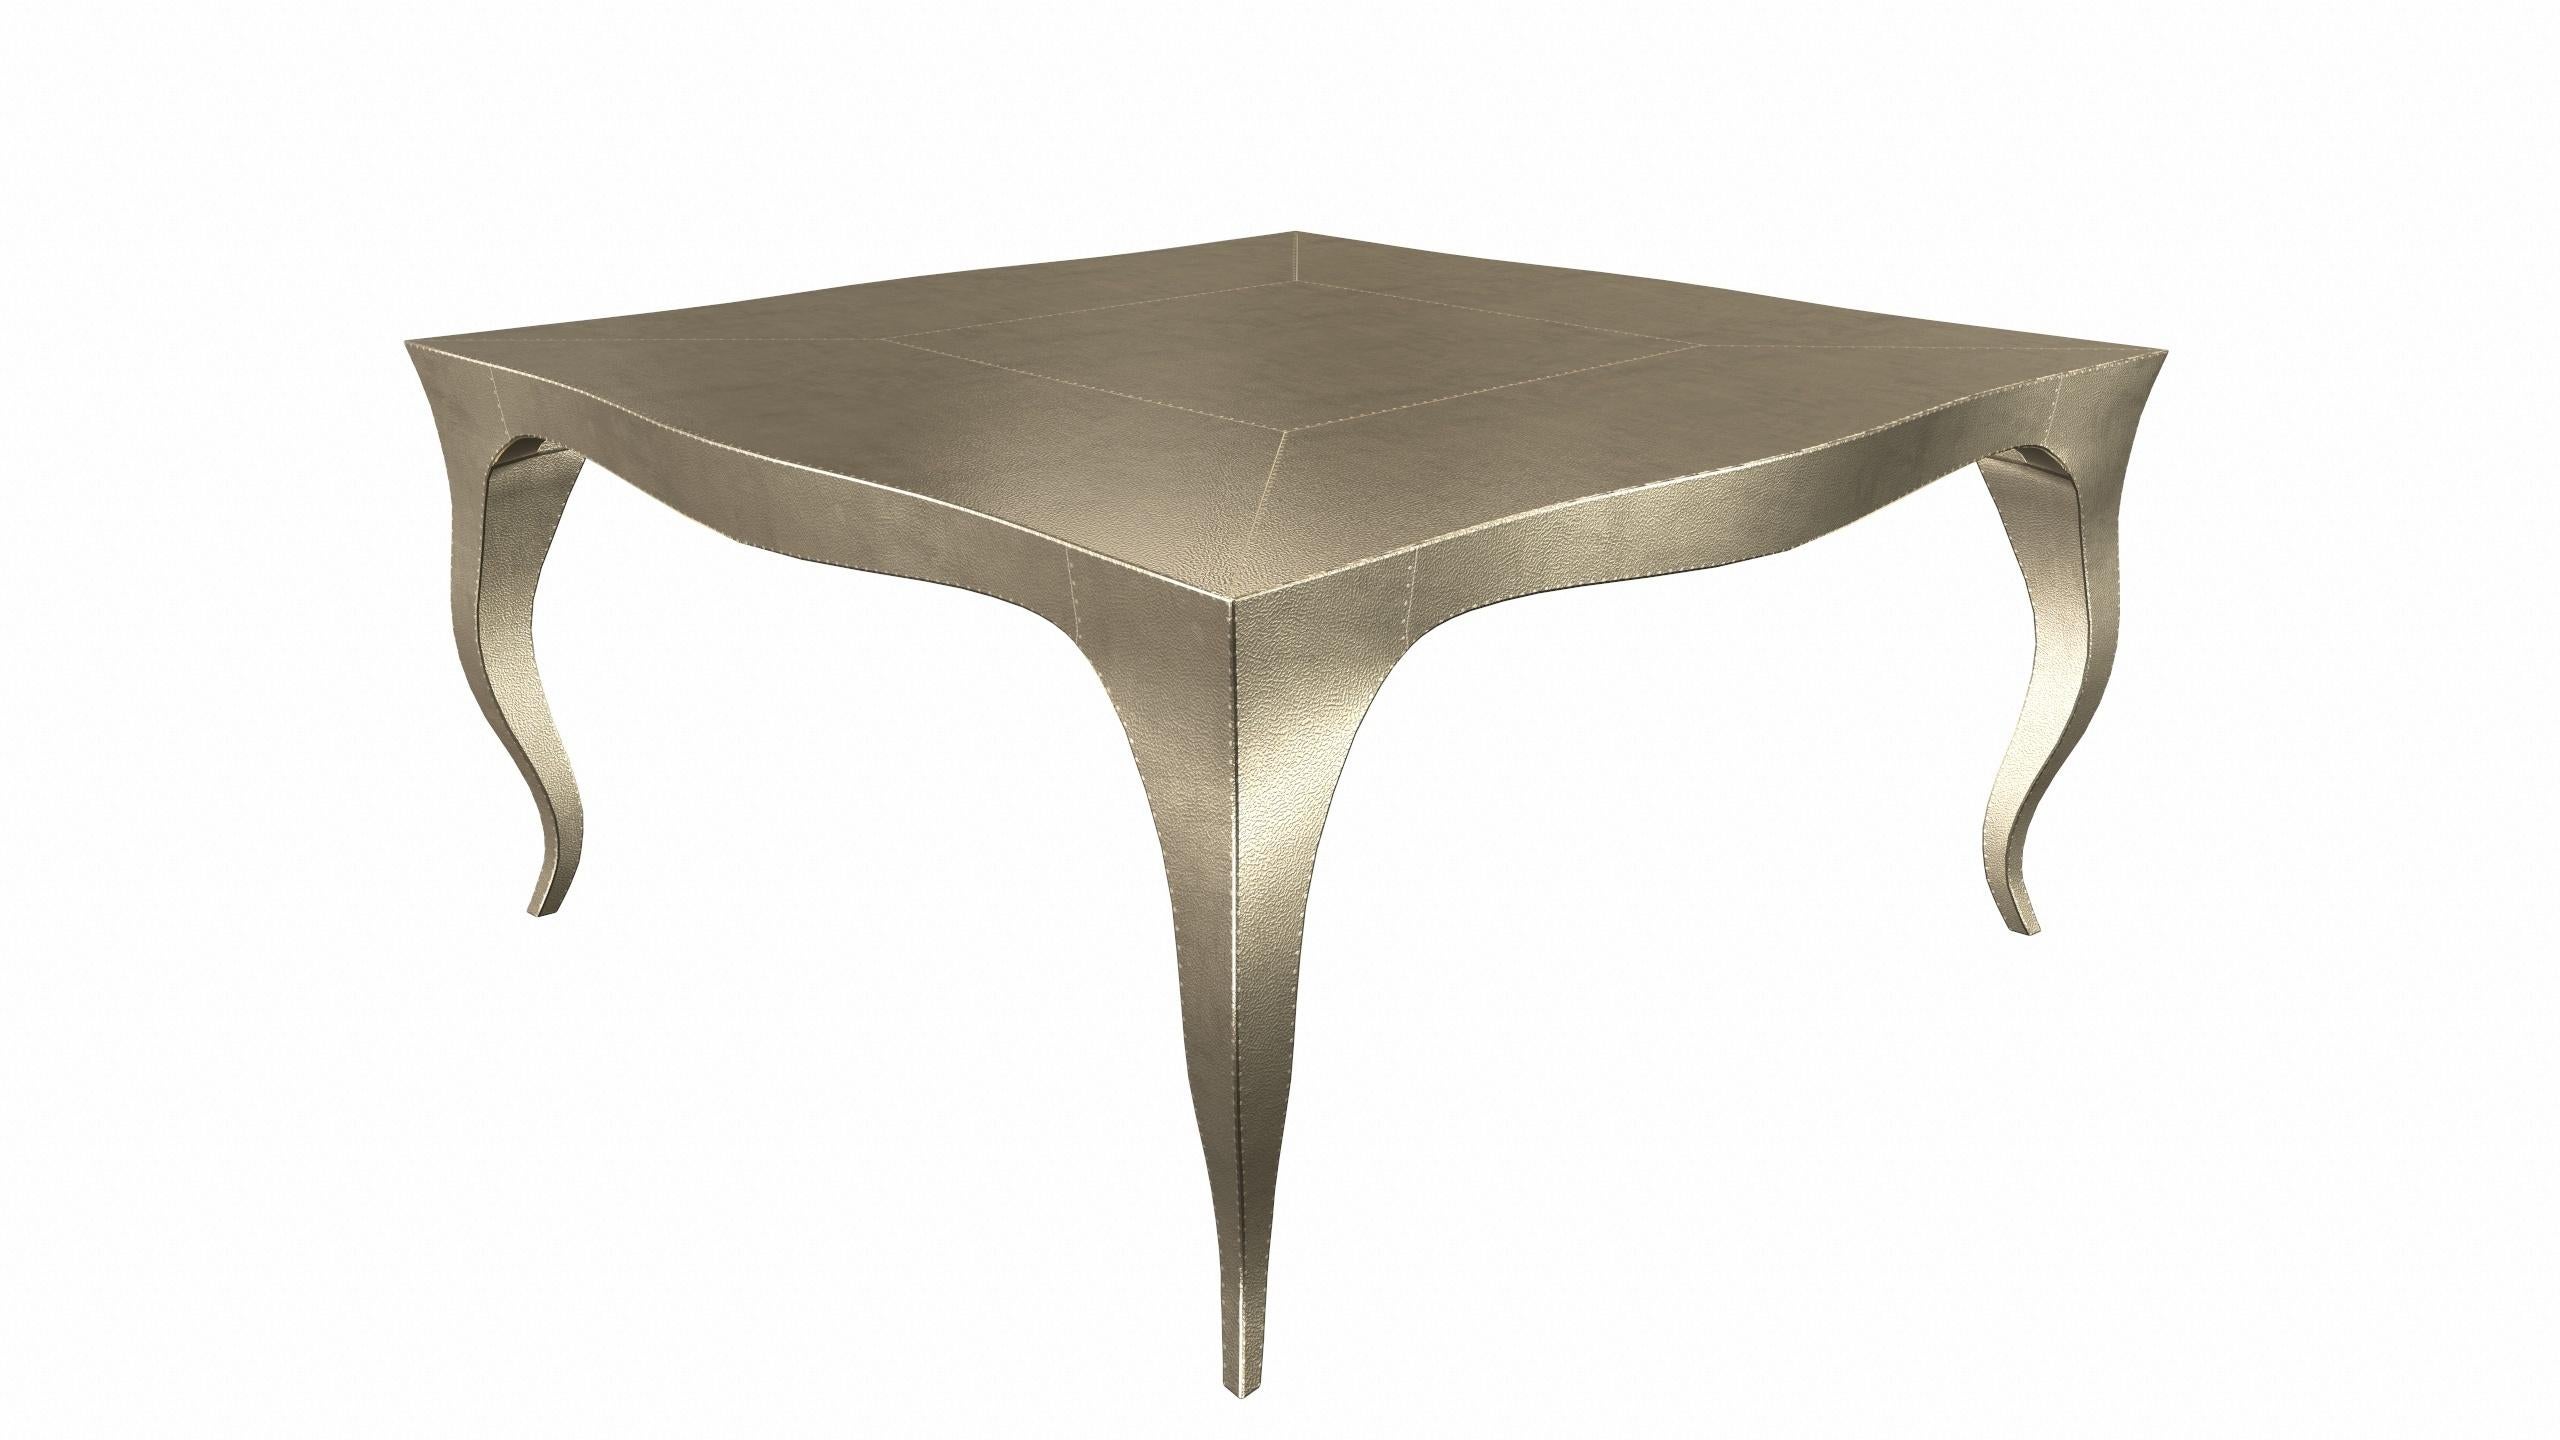 Other Louise Art Deco Game Tables Fine Hammered Brass 18.5x18.5x10 inch by P. Mathieu For Sale